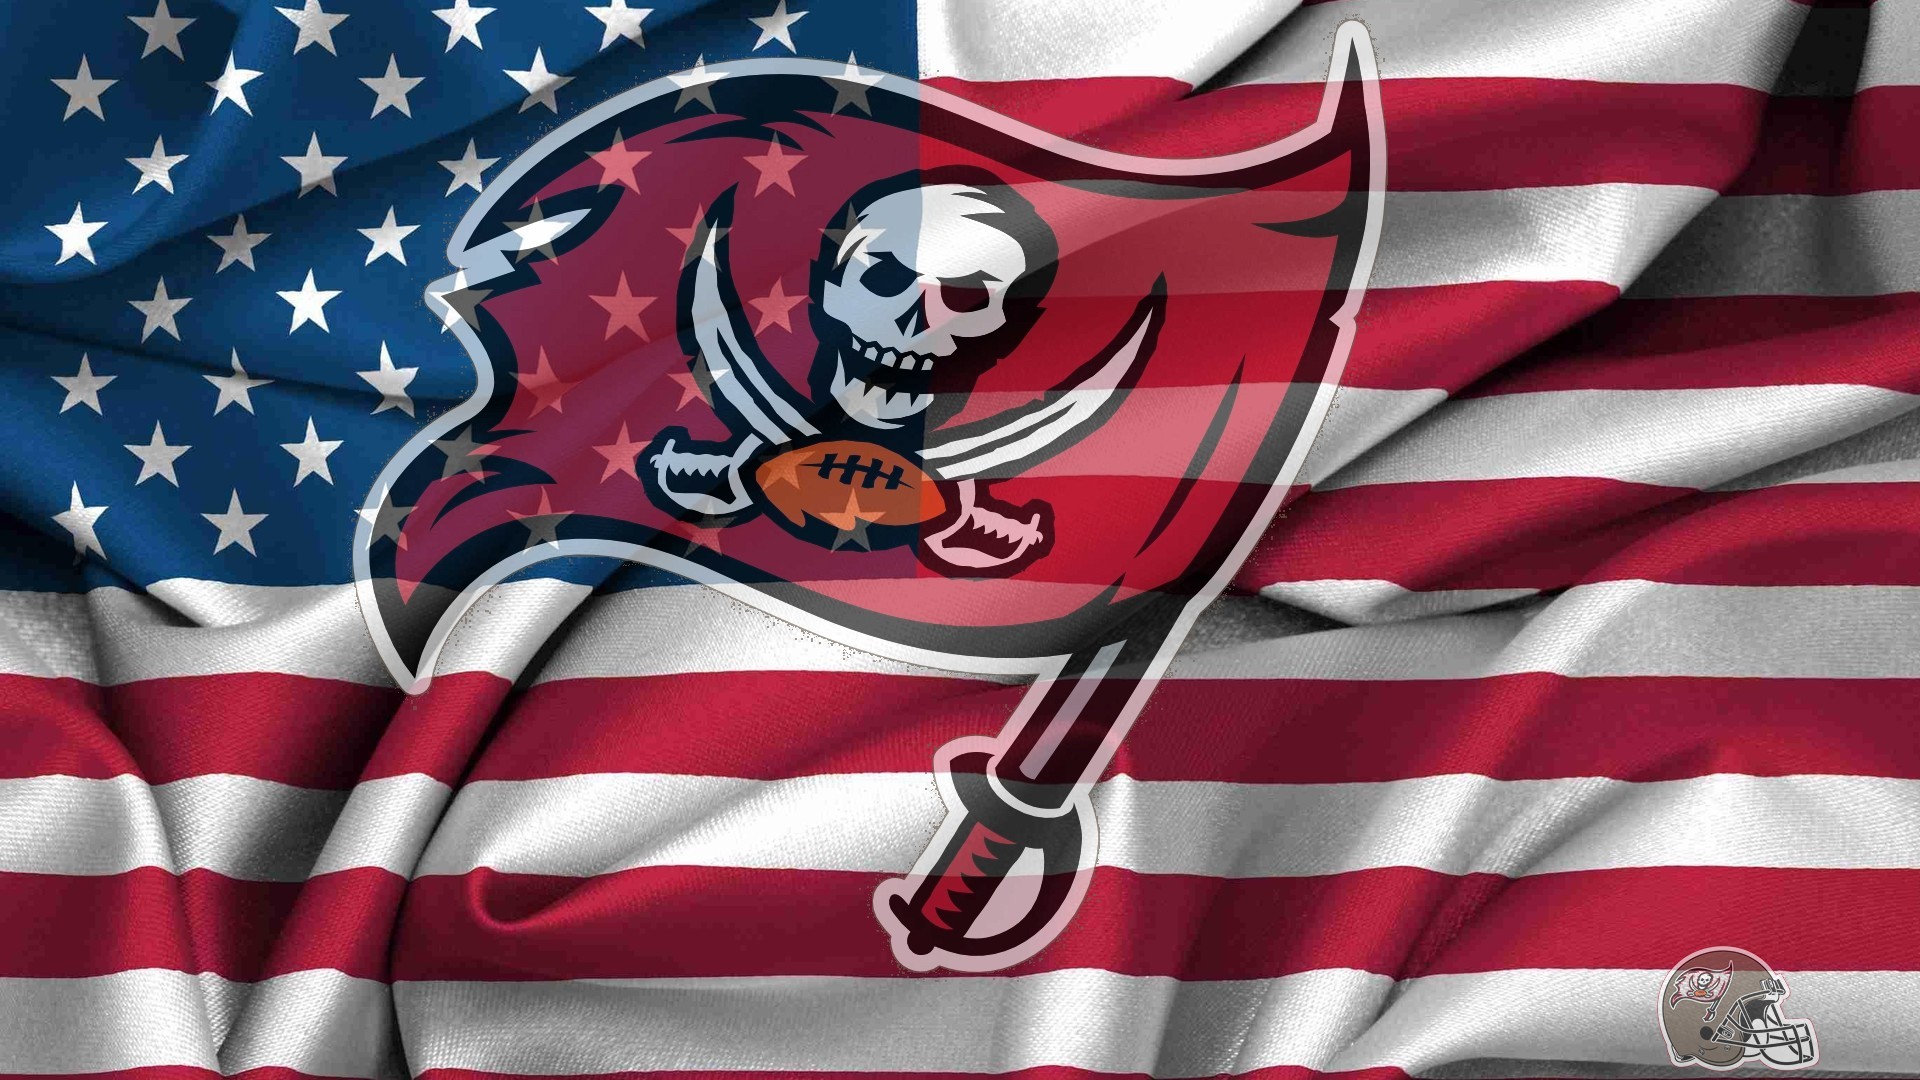 Tampa Bay Buccaneers HD Wallpapers with high-resolution 1920x1080 pixel. You can use this wallpaper for your Mac or Windows Desktop Background, iPhone, Android or Tablet and another Smartphone device